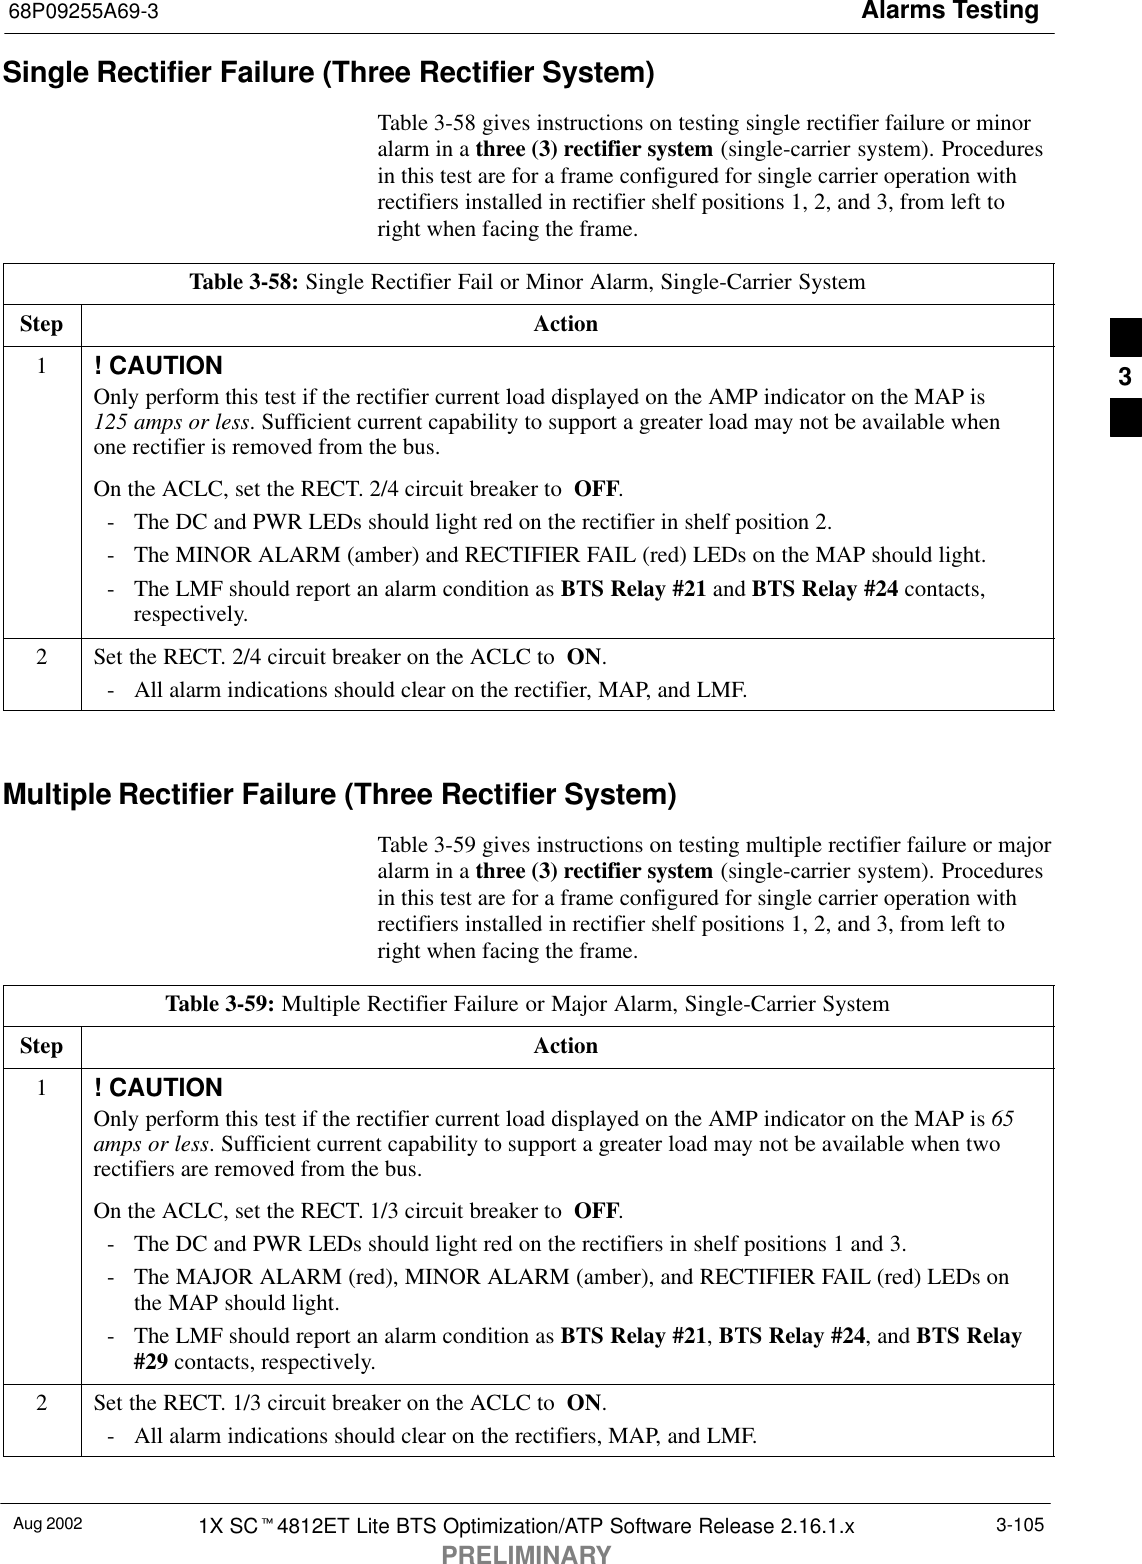 Alarms Testing68P09255A69-3Aug 2002 1X SCt4812ET Lite BTS Optimization/ATP Software Release 2.16.1.xPRELIMINARY3-105Single Rectifier Failure (Three Rectifier System)Table 3-58 gives instructions on testing single rectifier failure or minoralarm in a three (3) rectifier system (single-carrier system). Proceduresin this test are for a frame configured for single carrier operation withrectifiers installed in rectifier shelf positions 1, 2, and 3, from left toright when facing the frame.Table 3-58: Single Rectifier Fail or Minor Alarm, Single-Carrier SystemStep Action1! CAUTIONOnly perform this test if the rectifier current load displayed on the AMP indicator on the MAP is 125 amps or less. Sufficient current capability to support a greater load may not be available whenone rectifier is removed from the bus.On the ACLC, set the RECT. 2/4 circuit breaker to  OFF.- The DC and PWR LEDs should light red on the rectifier in shelf position 2.- The MINOR ALARM (amber) and RECTIFIER FAIL (red) LEDs on the MAP should light.- The LMF should report an alarm condition as BTS Relay #21 and BTS Relay #24 contacts,respectively.2Set the RECT. 2/4 circuit breaker on the ACLC to  ON.- All alarm indications should clear on the rectifier, MAP, and LMF. Multiple Rectifier Failure (Three Rectifier System)Table 3-59 gives instructions on testing multiple rectifier failure or majoralarm in a three (3) rectifier system (single-carrier system). Proceduresin this test are for a frame configured for single carrier operation withrectifiers installed in rectifier shelf positions 1, 2, and 3, from left toright when facing the frame.Table 3-59: Multiple Rectifier Failure or Major Alarm, Single-Carrier SystemStep Action1! CAUTIONOnly perform this test if the rectifier current load displayed on the AMP indicator on the MAP is 65amps or less. Sufficient current capability to support a greater load may not be available when tworectifiers are removed from the bus.On the ACLC, set the RECT. 1/3 circuit breaker to  OFF.- The DC and PWR LEDs should light red on the rectifiers in shelf positions 1 and 3.- The MAJOR ALARM (red), MINOR ALARM (amber), and RECTIFIER FAIL (red) LEDs onthe MAP should light.- The LMF should report an alarm condition as BTS Relay #21, BTS Relay #24, and BTS Relay#29 contacts, respectively.2Set the RECT. 1/3 circuit breaker on the ACLC to  ON.- All alarm indications should clear on the rectifiers, MAP, and LMF. 3